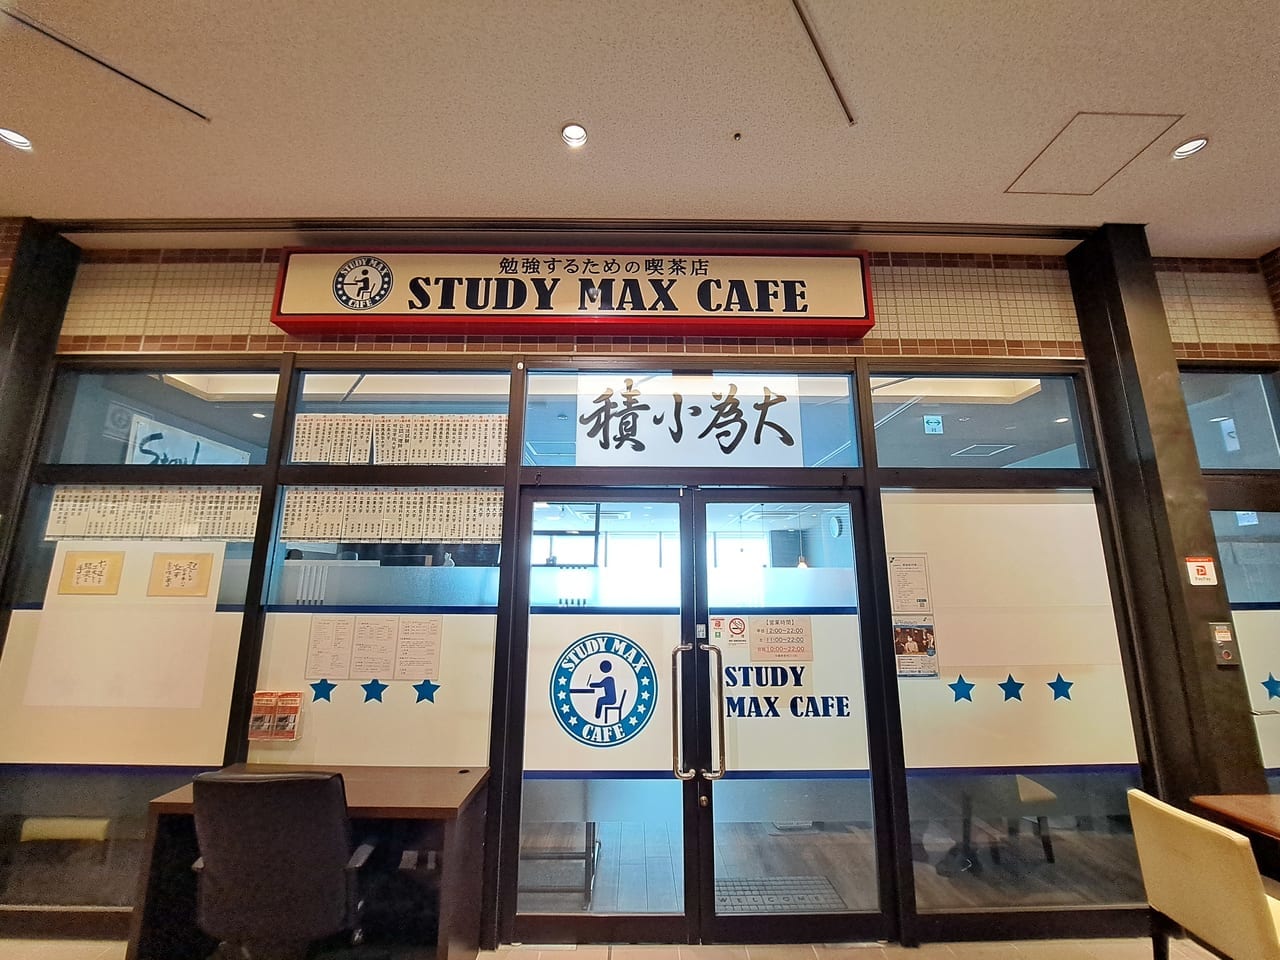 STUDY MAX CAFE